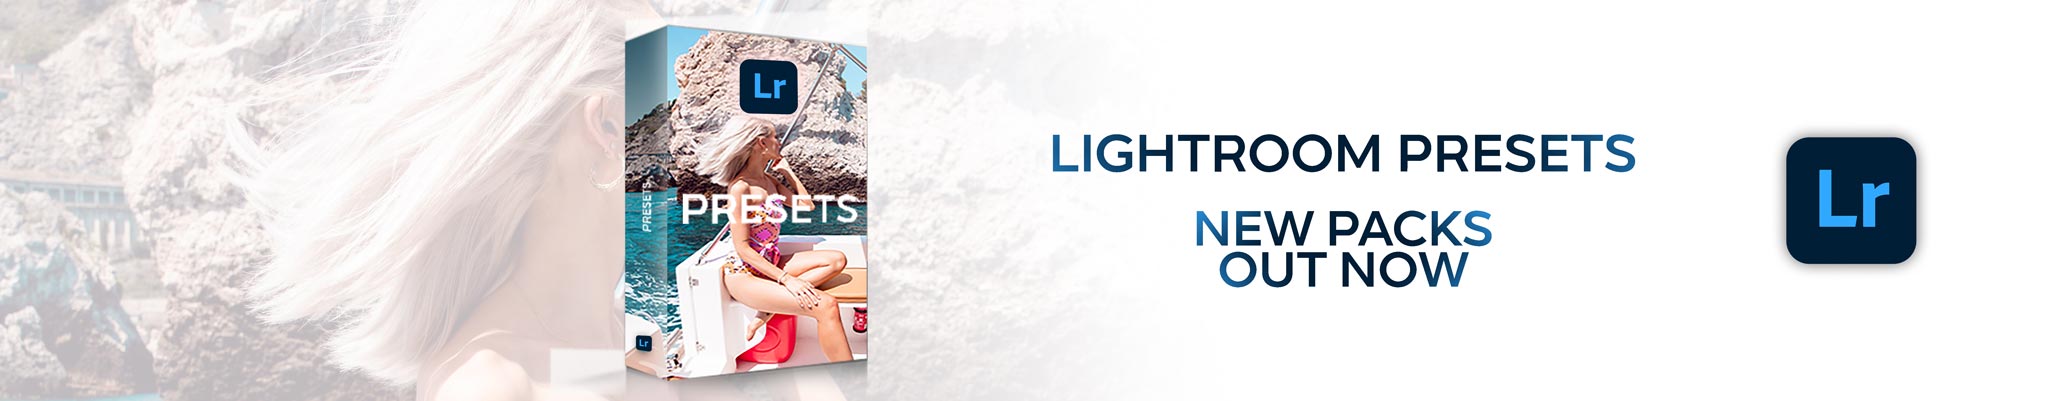 Lightroom Presets now available